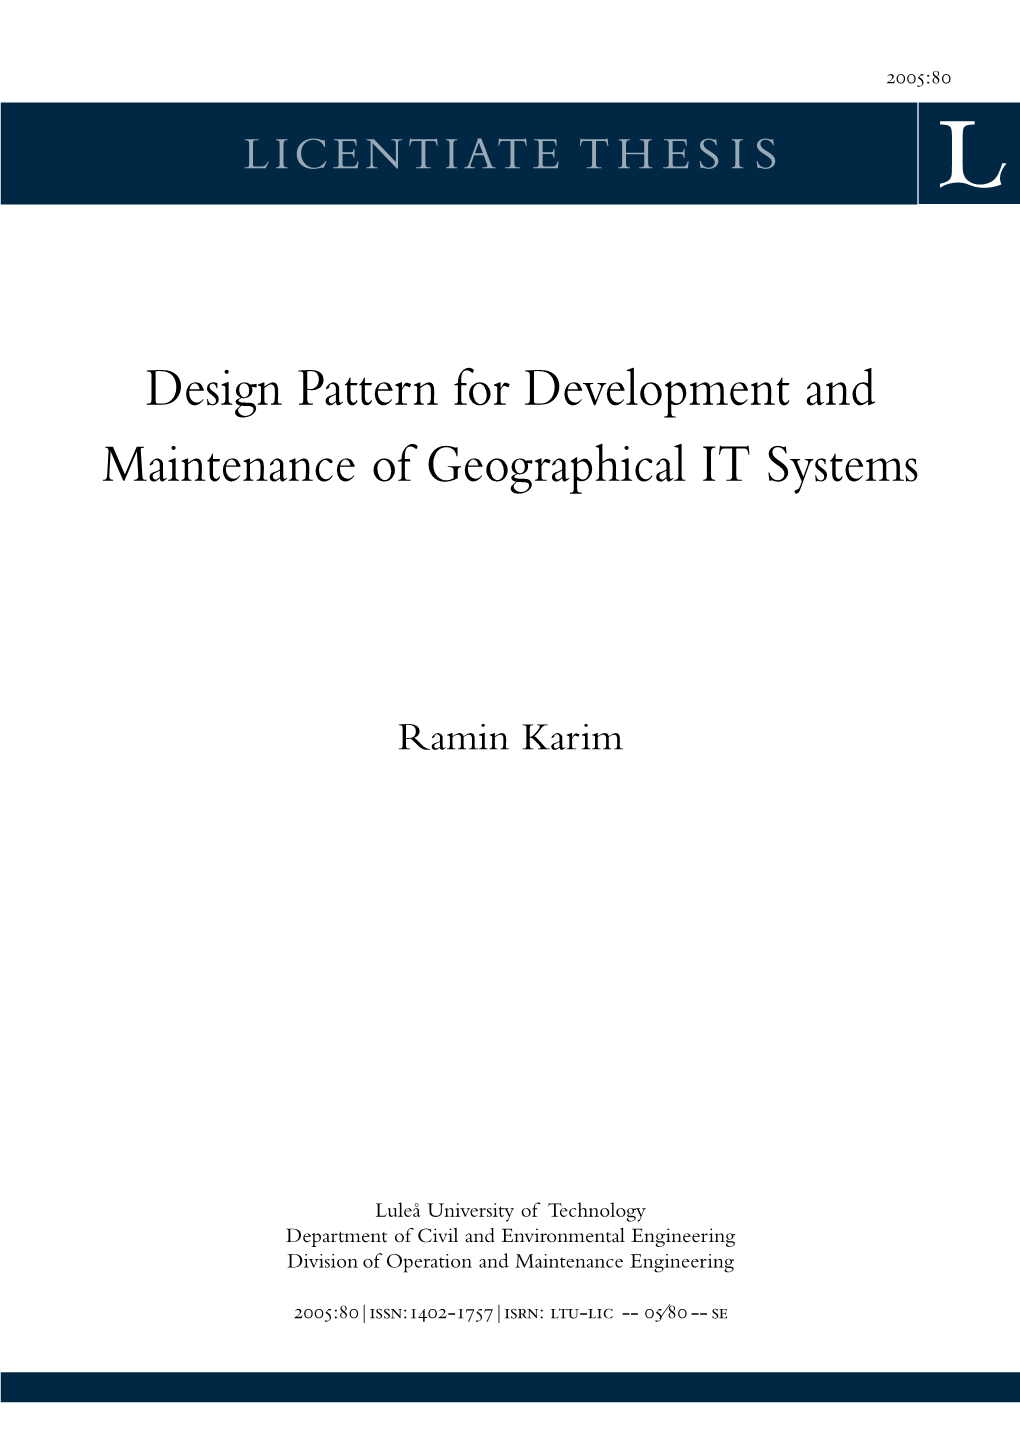 Design Pattern for Development and Maintenance of Geographical IT Systems